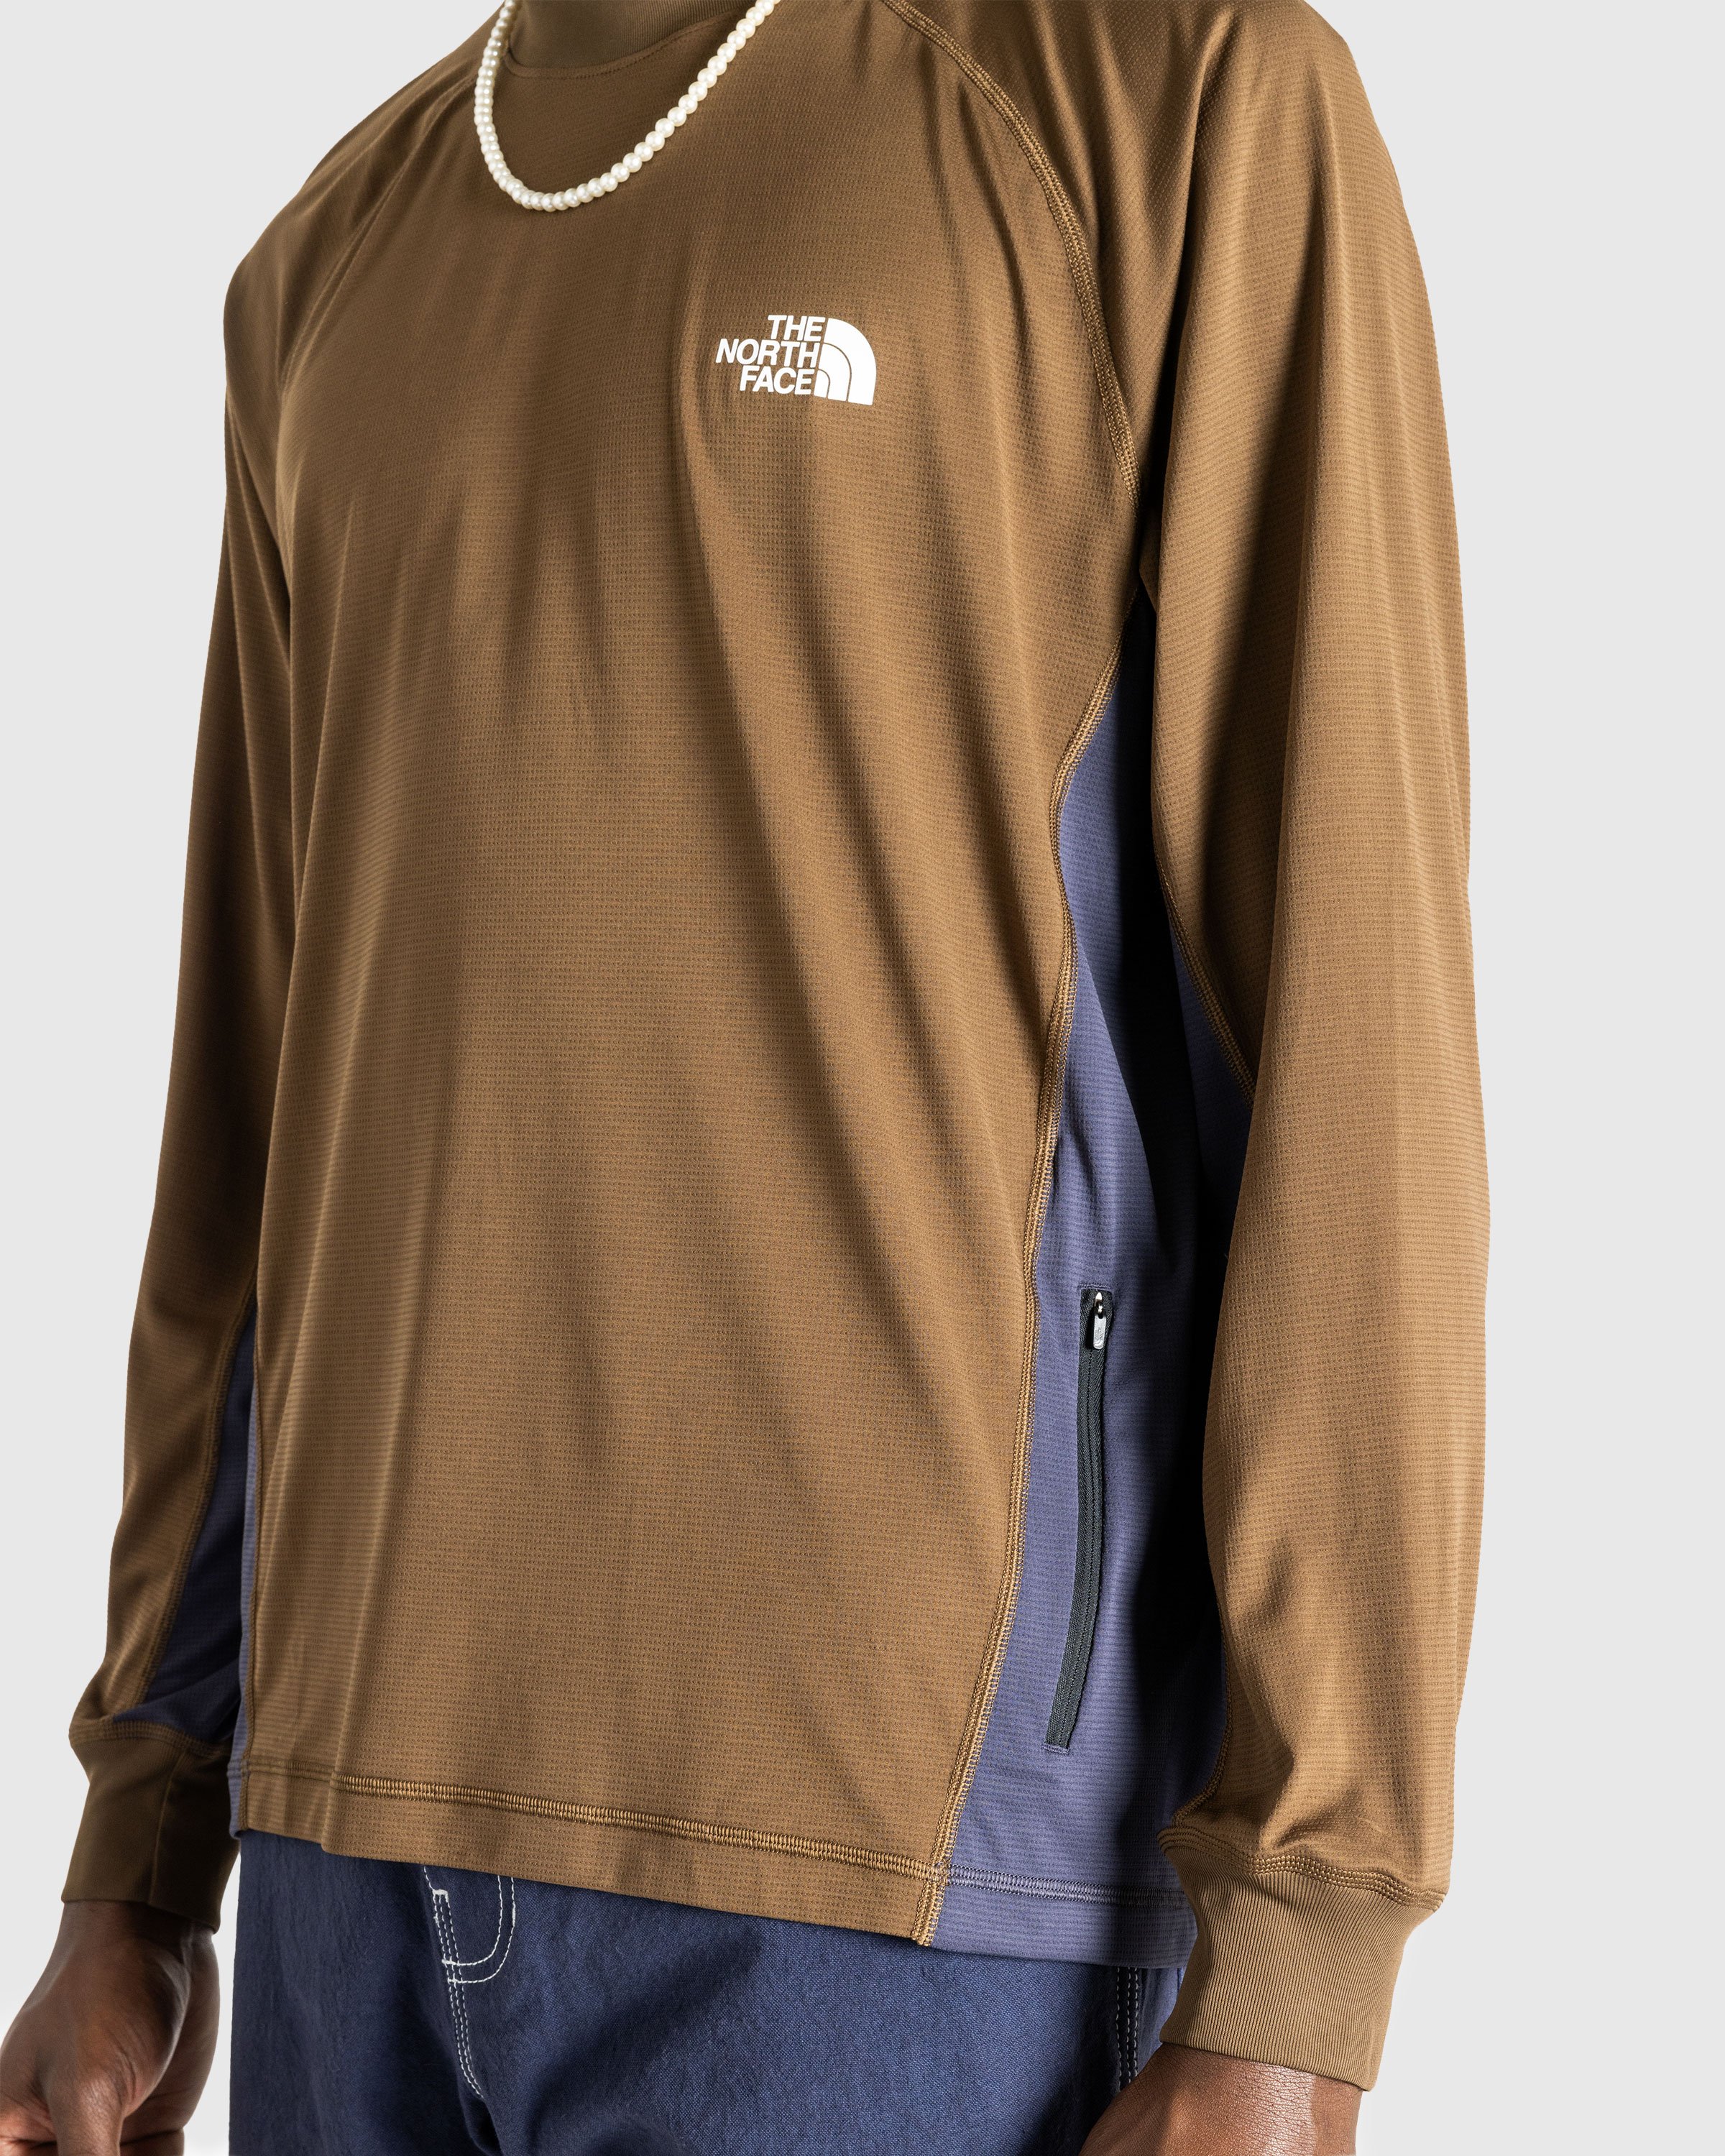 The North Face x UNDERCOVER - SOUKUU TRAIL RUN L/S TEE PERISCOPE GREY/DARK EAR - Clothing - Grey - Image 5